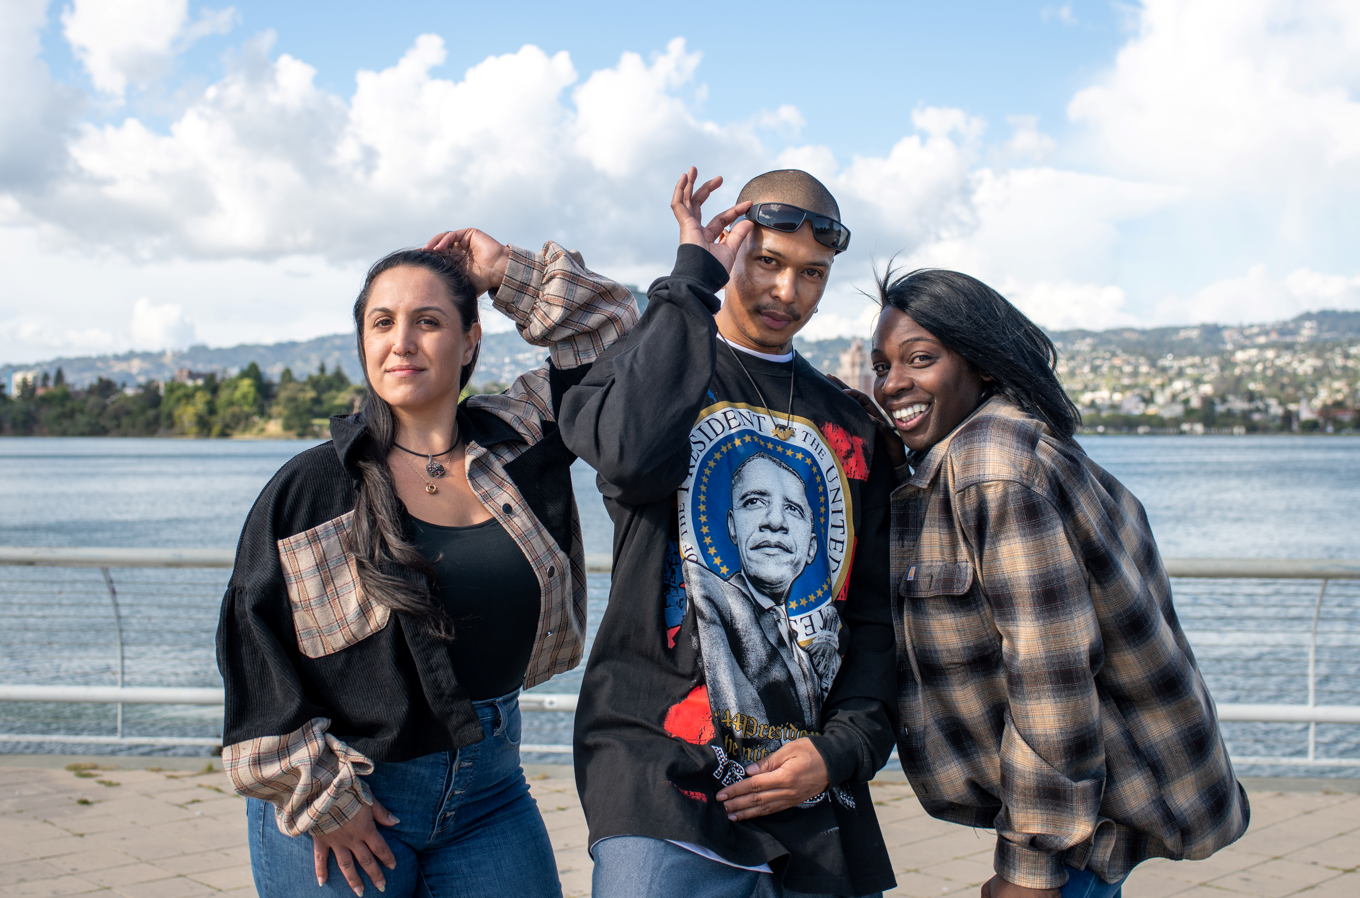 Three people stand in front of Lake Merritt in Oakland and pose while looking at the camera.